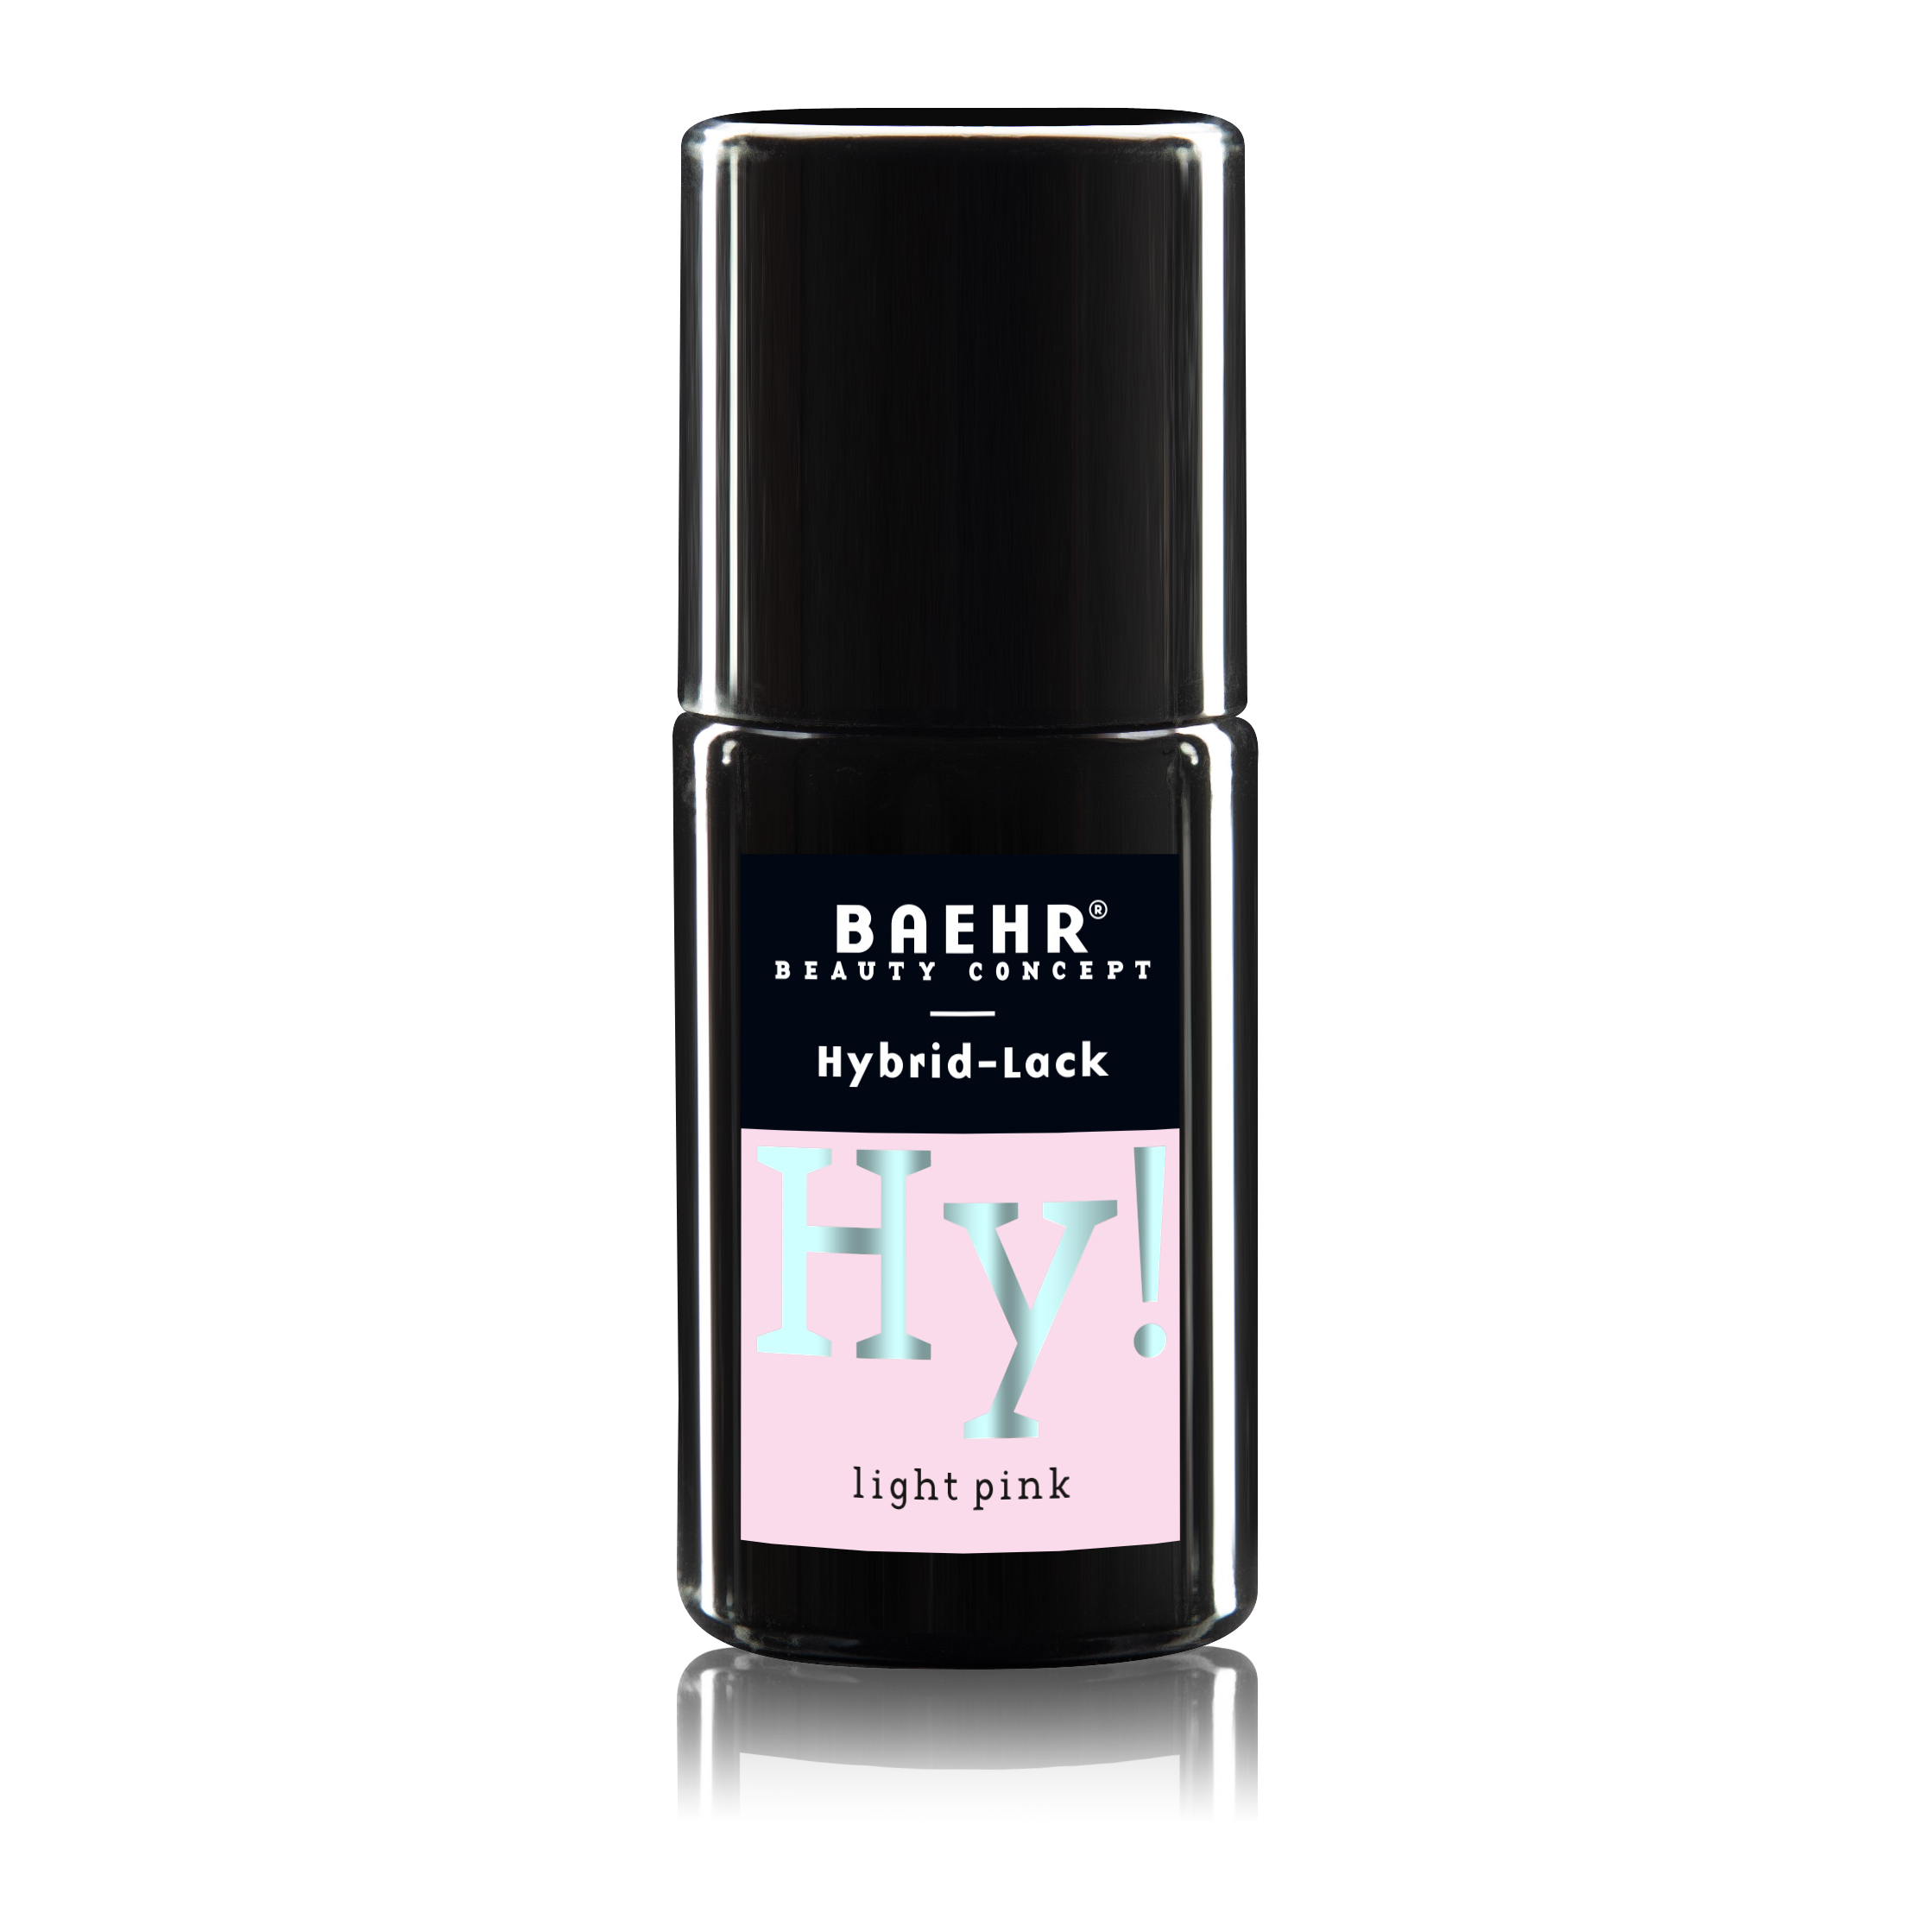 BAEHR BEAUTY CONCEPT - NAILS Hy! Hybrid-Lack, light pink 8 ml